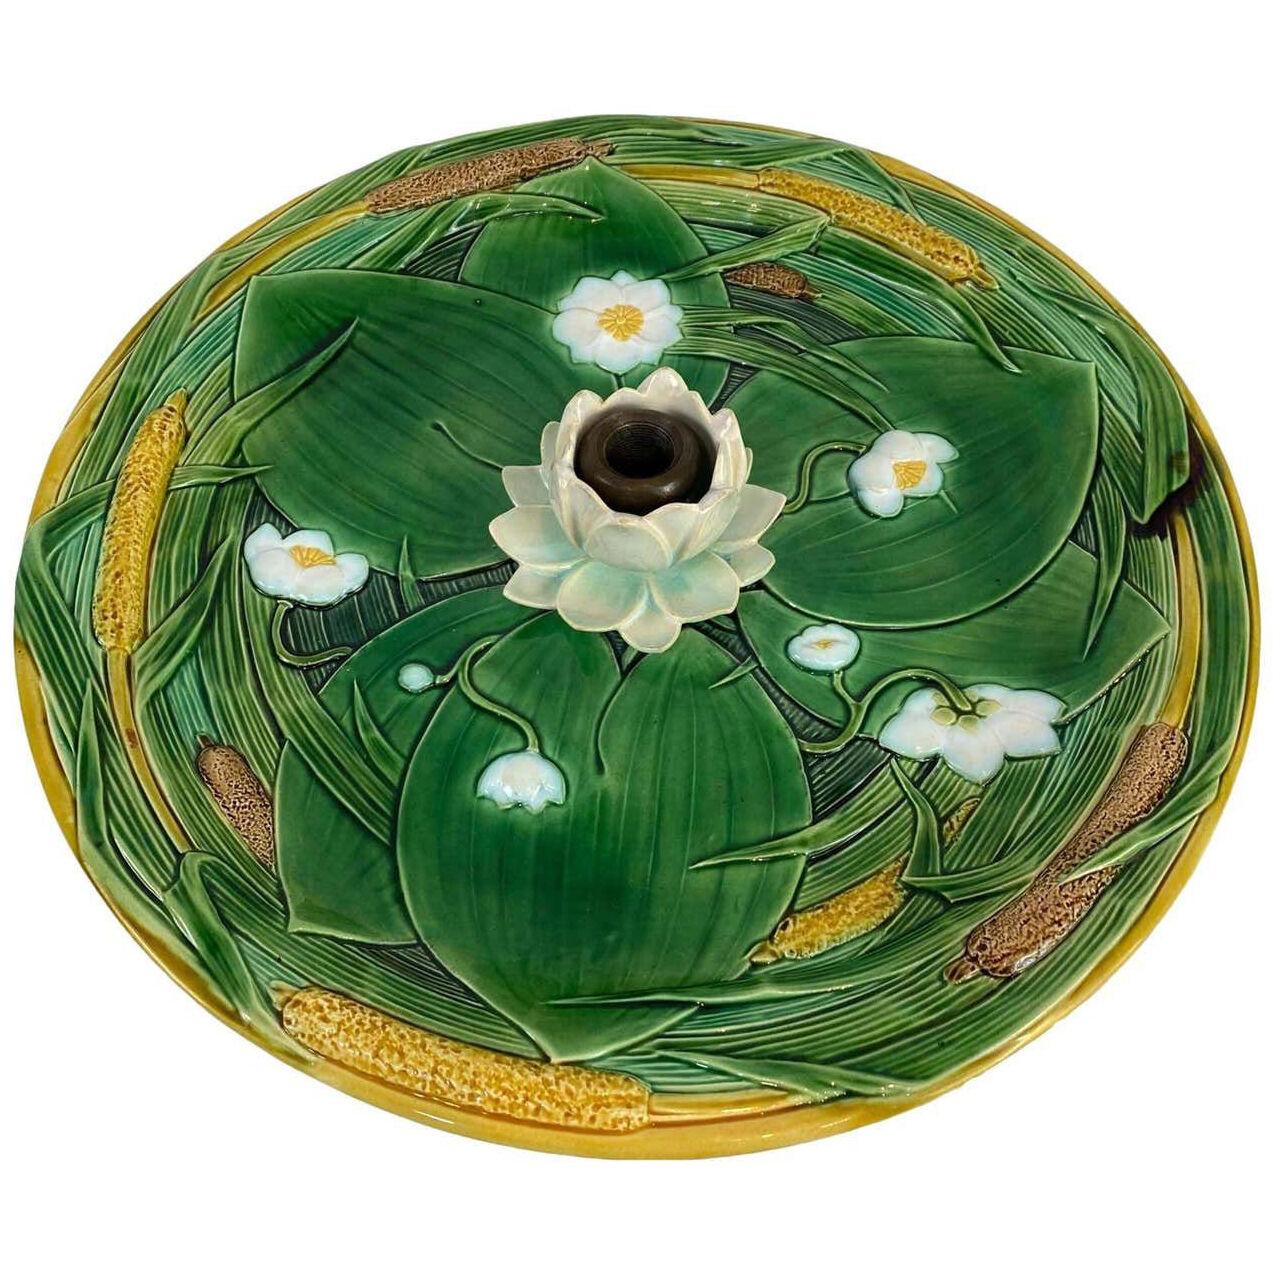 Minton Majolica Centerpiece Tray 15-in, Lotus Flower on Green Ground, Dated 1863